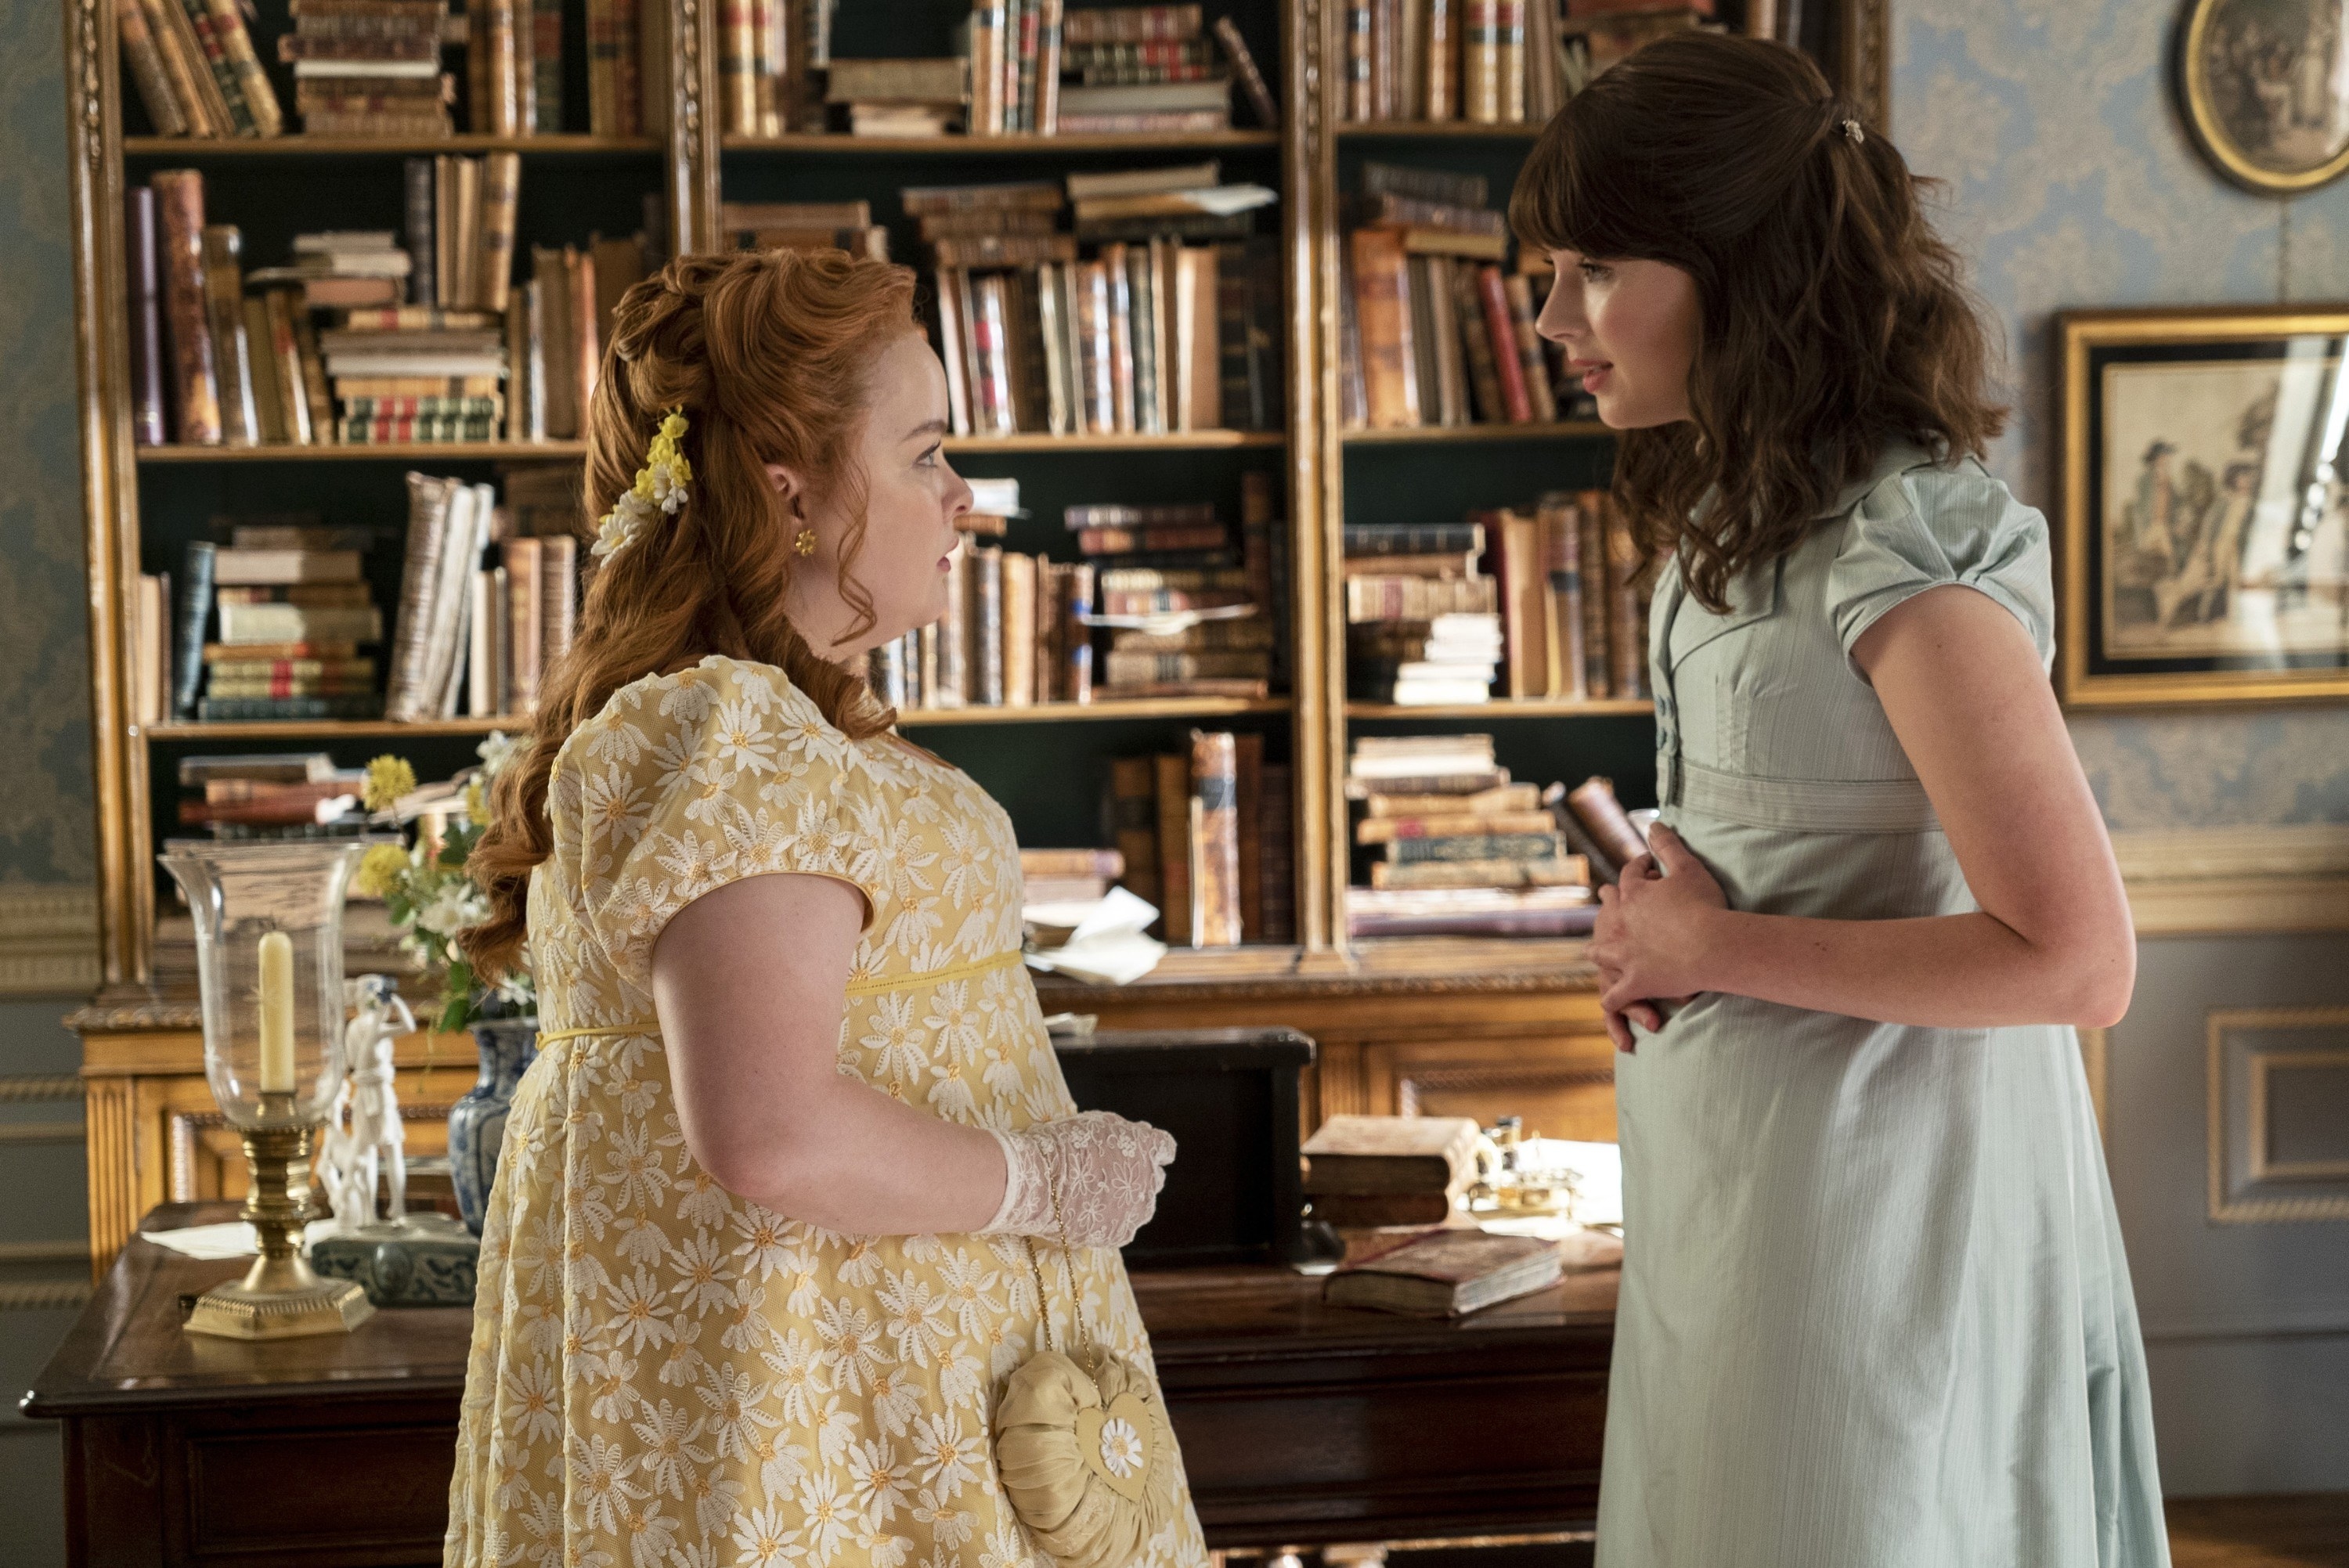 Penelope and Eloise talking in a study